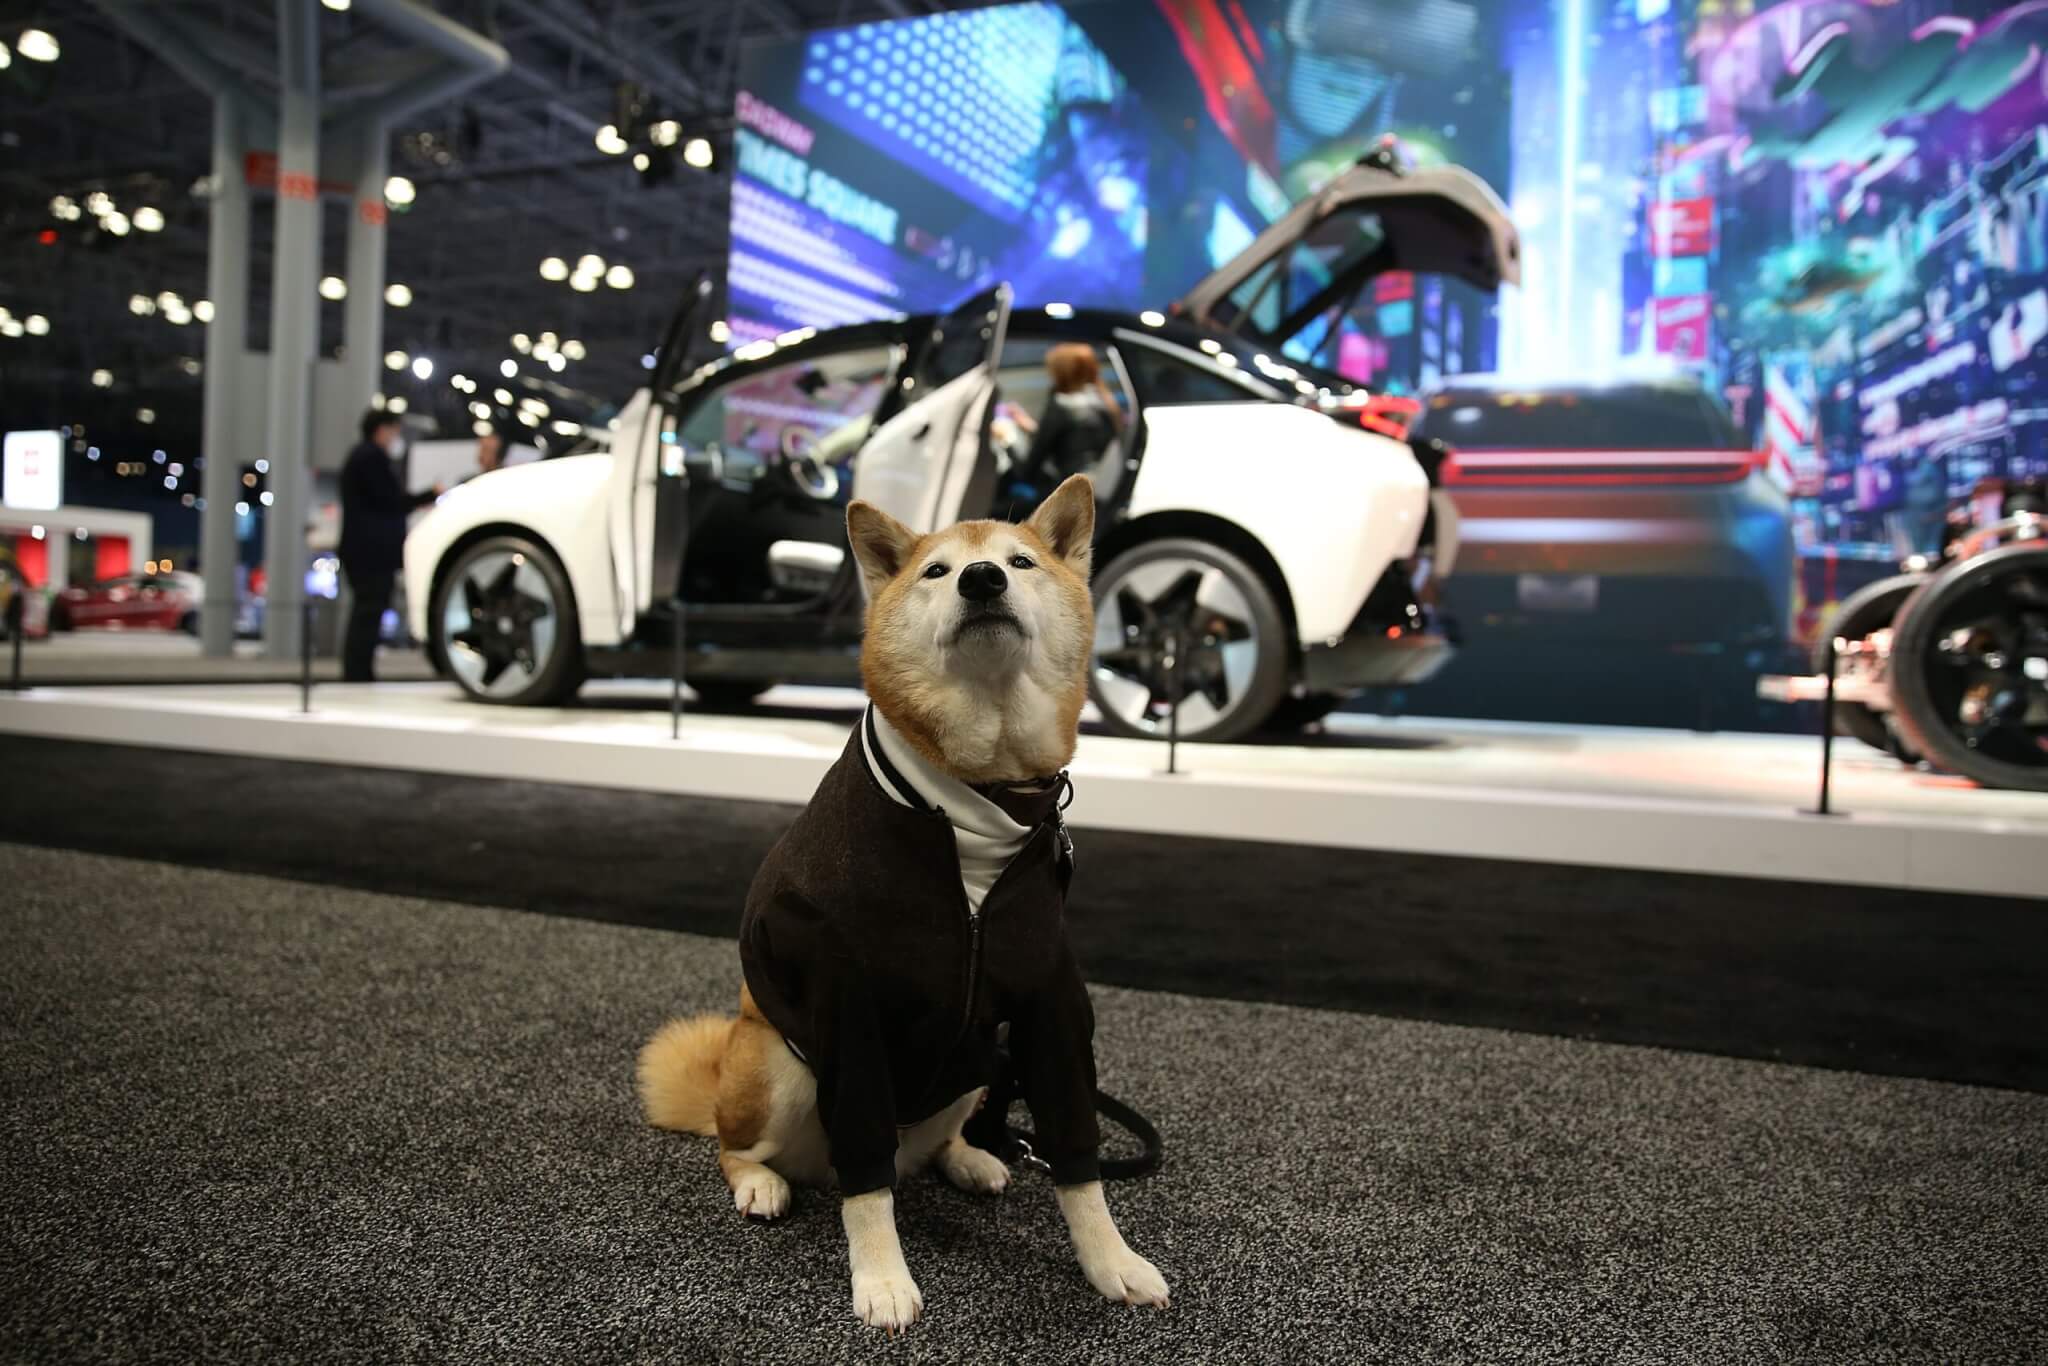 Social media sensation Menswear Dog, Bodhi, poses in front of Los Angeles-based INDI EV's new smart electric car, INDI ONE at the New York International Auto Show.